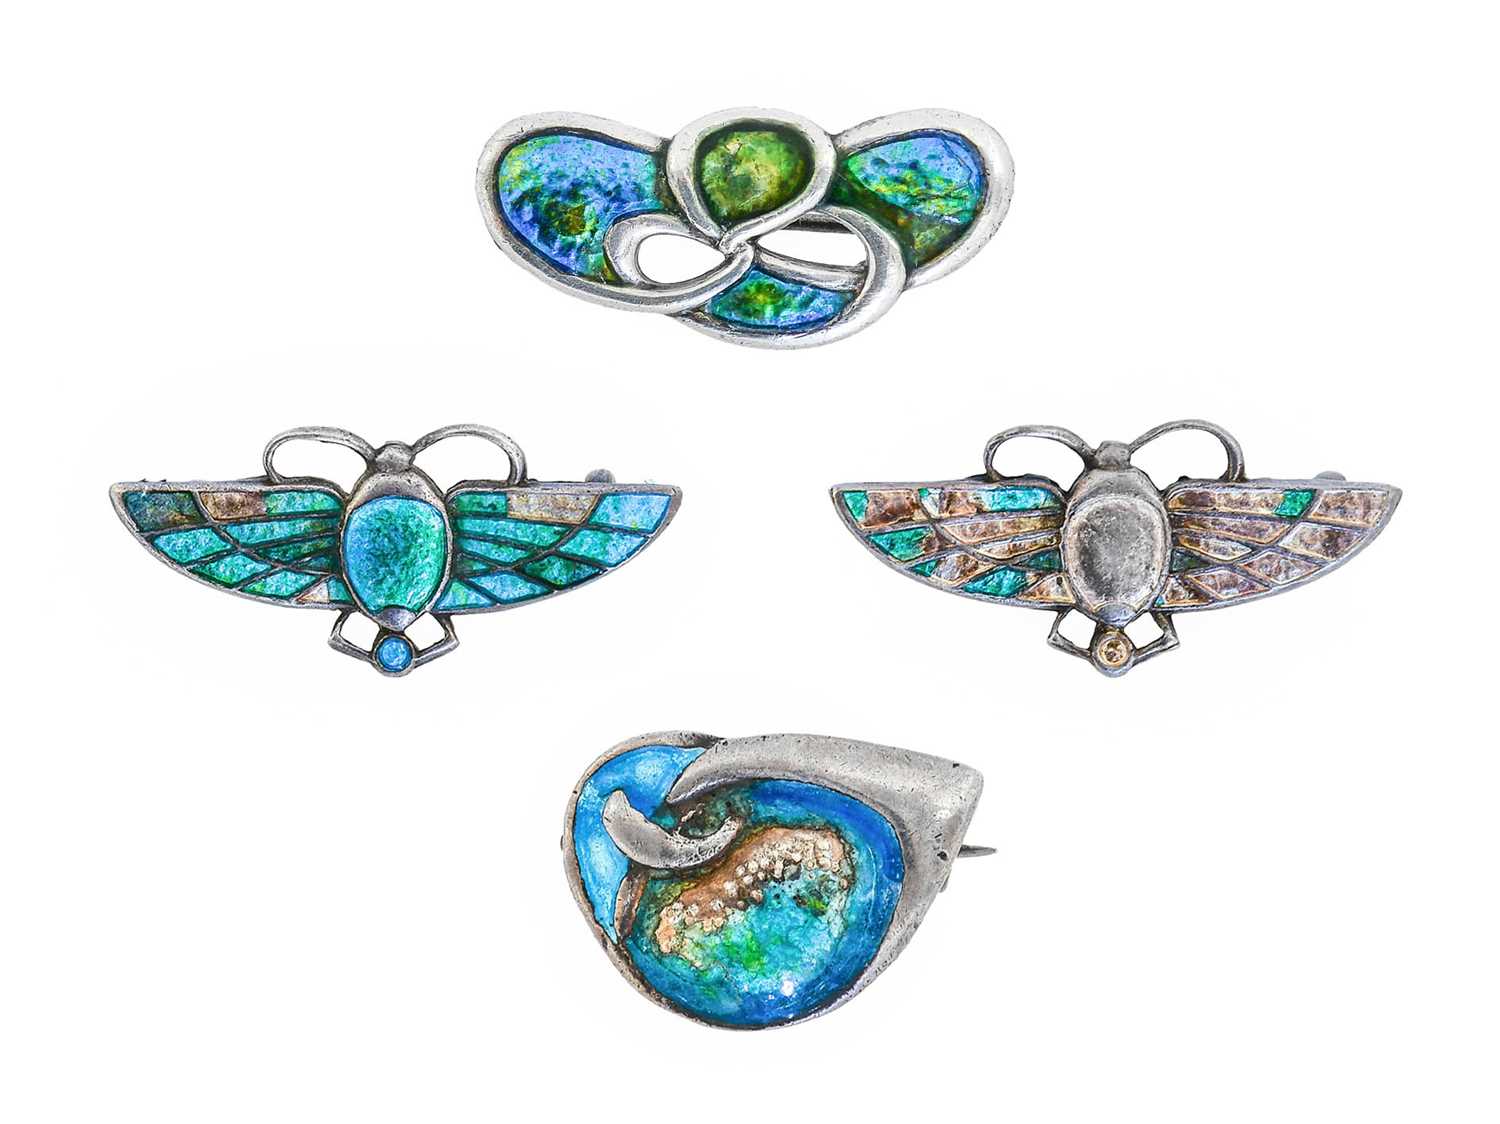 Three Arts and Crafts Silver and Enamel Brooches, by Charles Horner, two butterflies and a Celtic